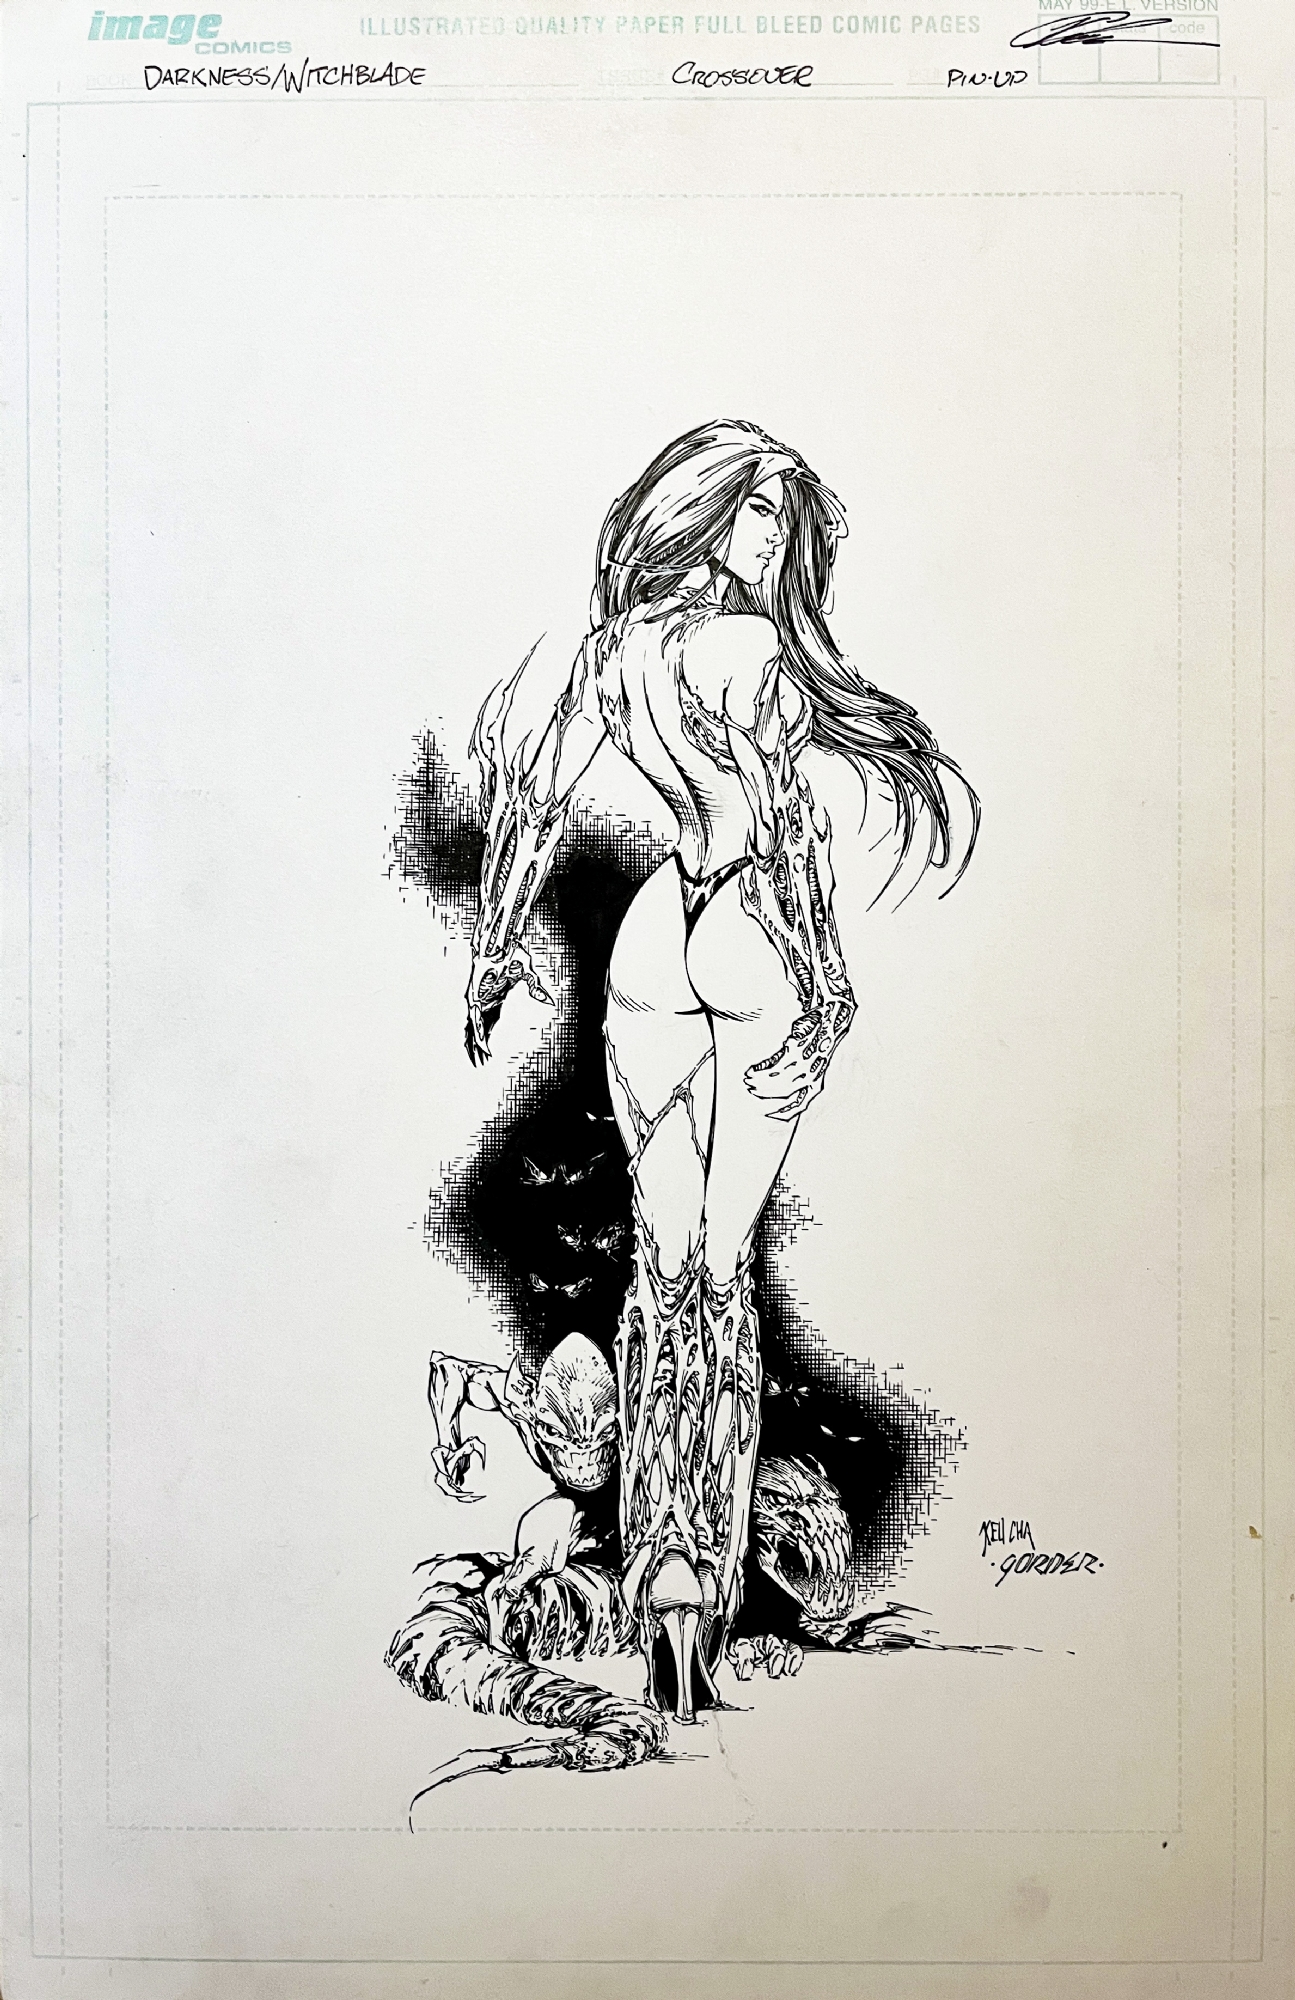 Witchblade #40 Museum Edition cover (Darkness/Witchblade pinup) Comic Art